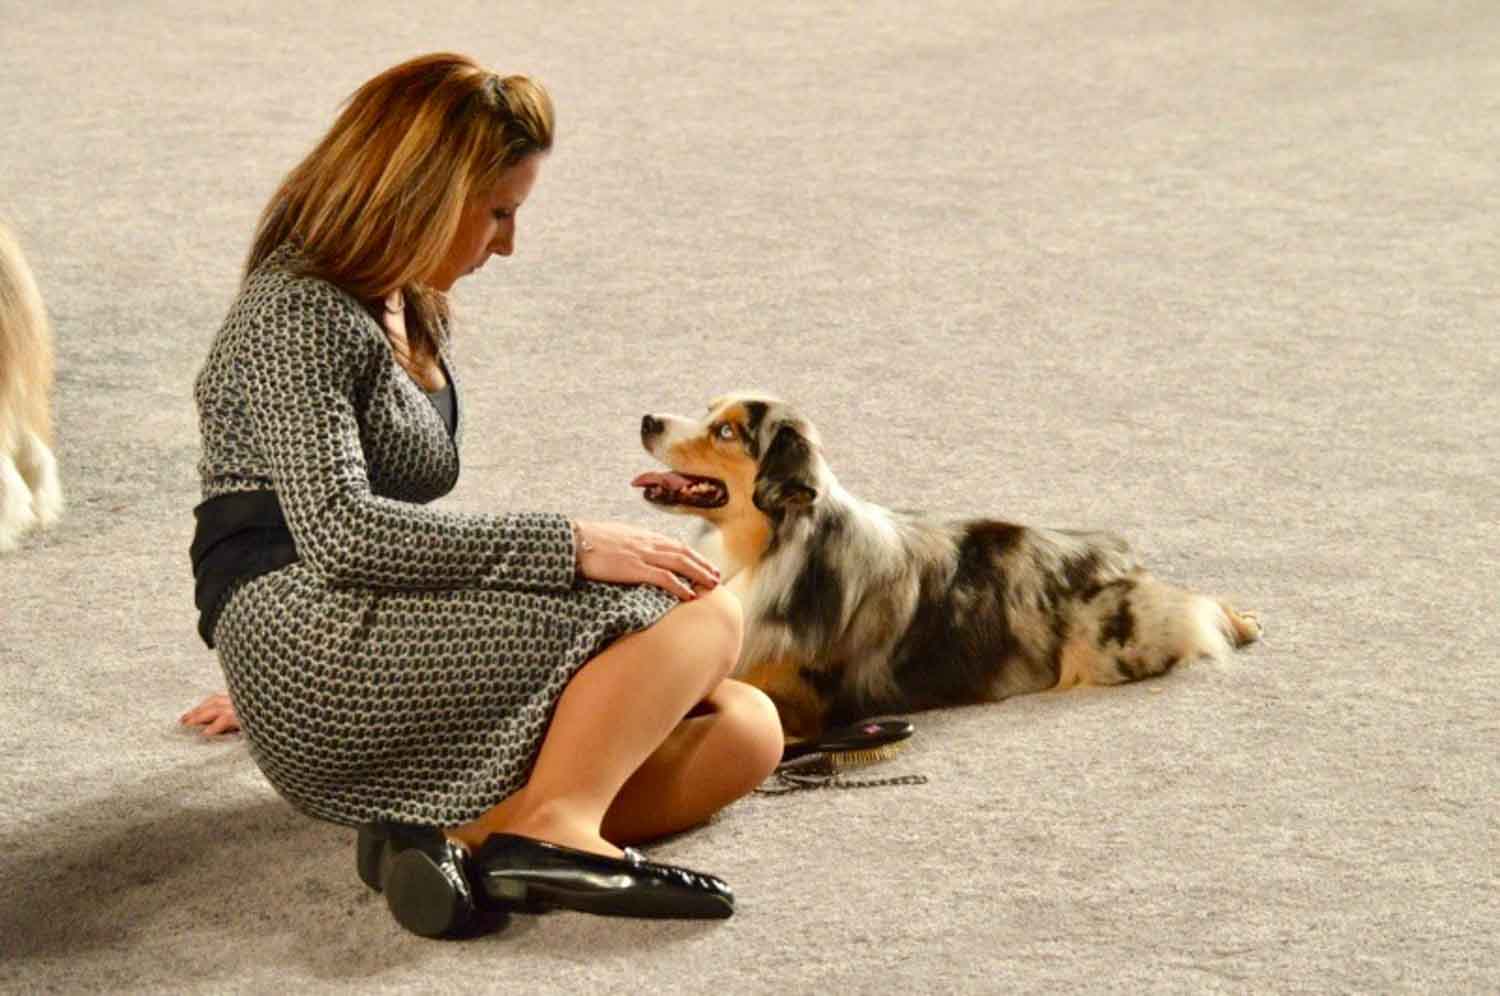 Ringside at the American Kennel Club National Championship